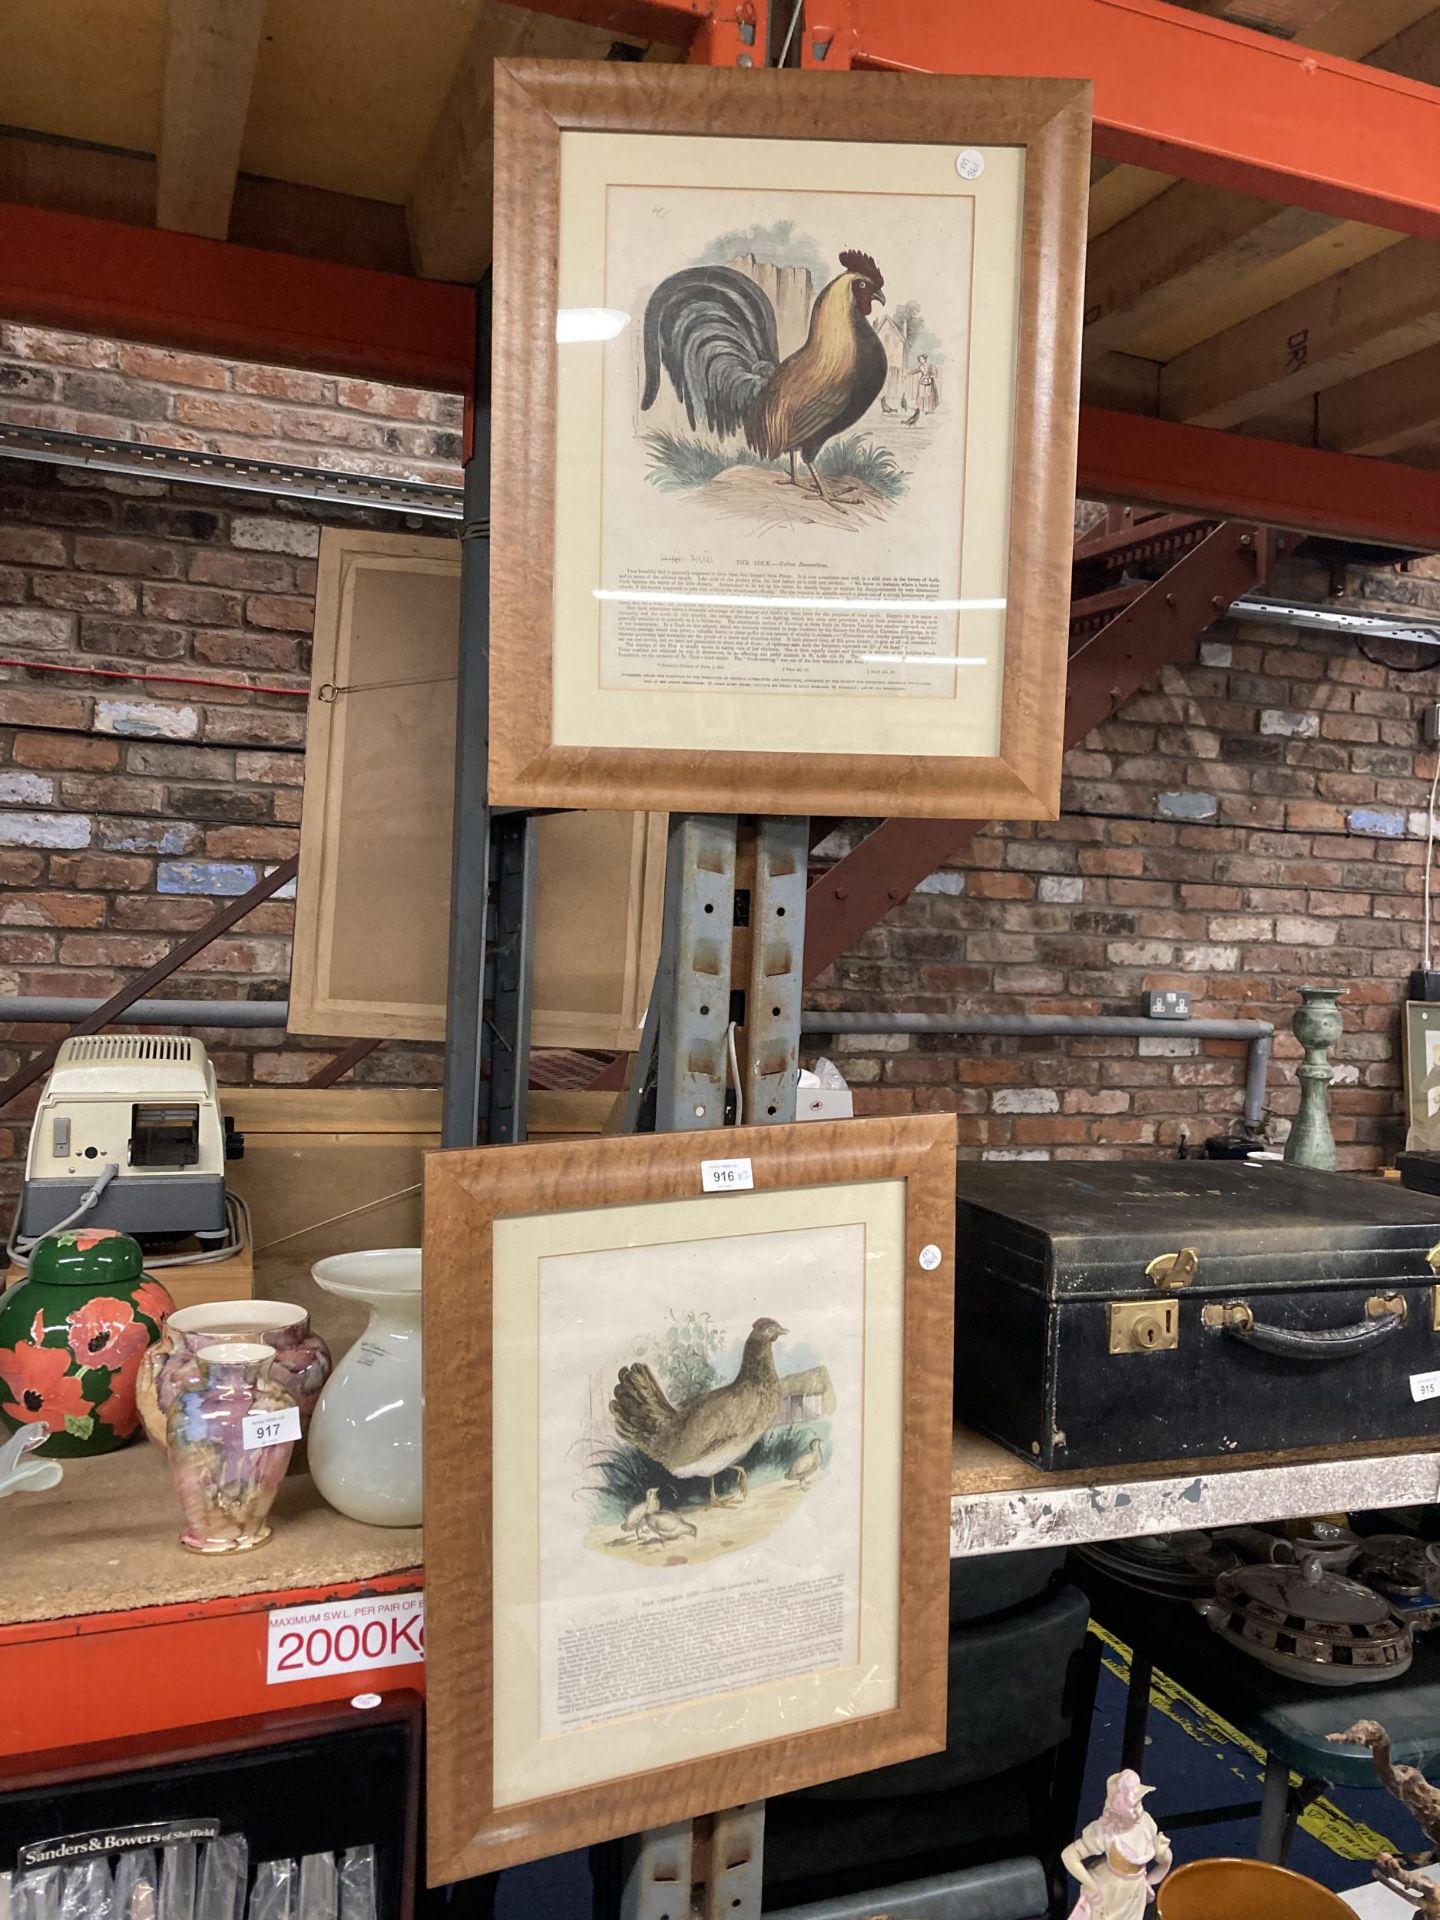 TWO FRAMED PRINTS OF BIRDS, 'THE COMMON HEN' AND 'THE COCK'